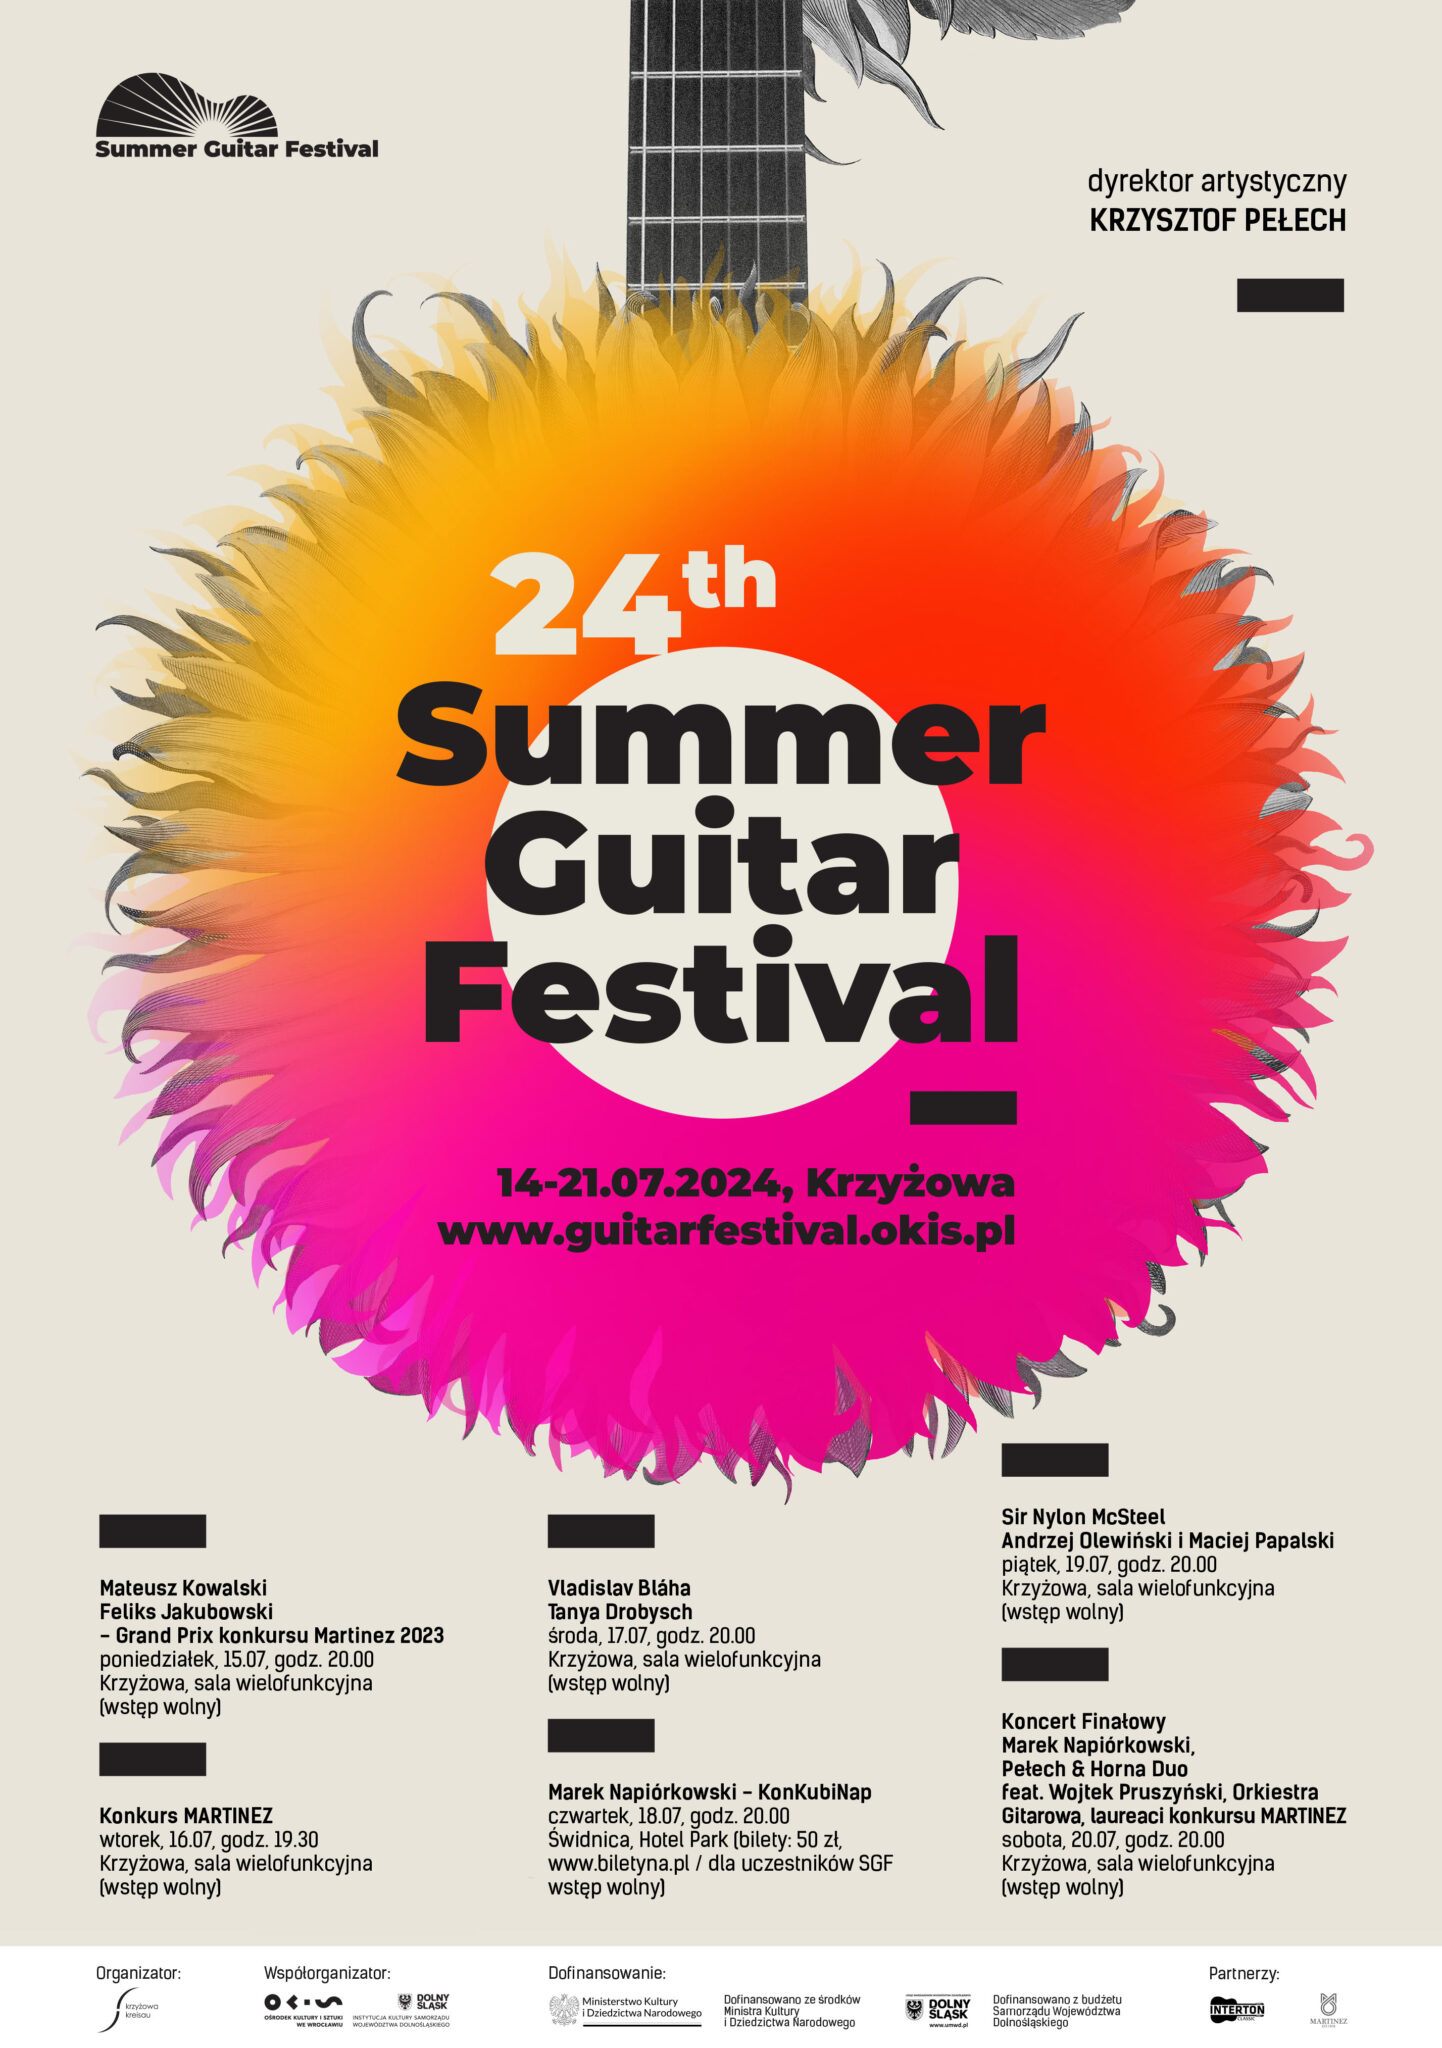 Join Us for the Concerts of the 24th Summer Guitar Festival in Krzyżowa